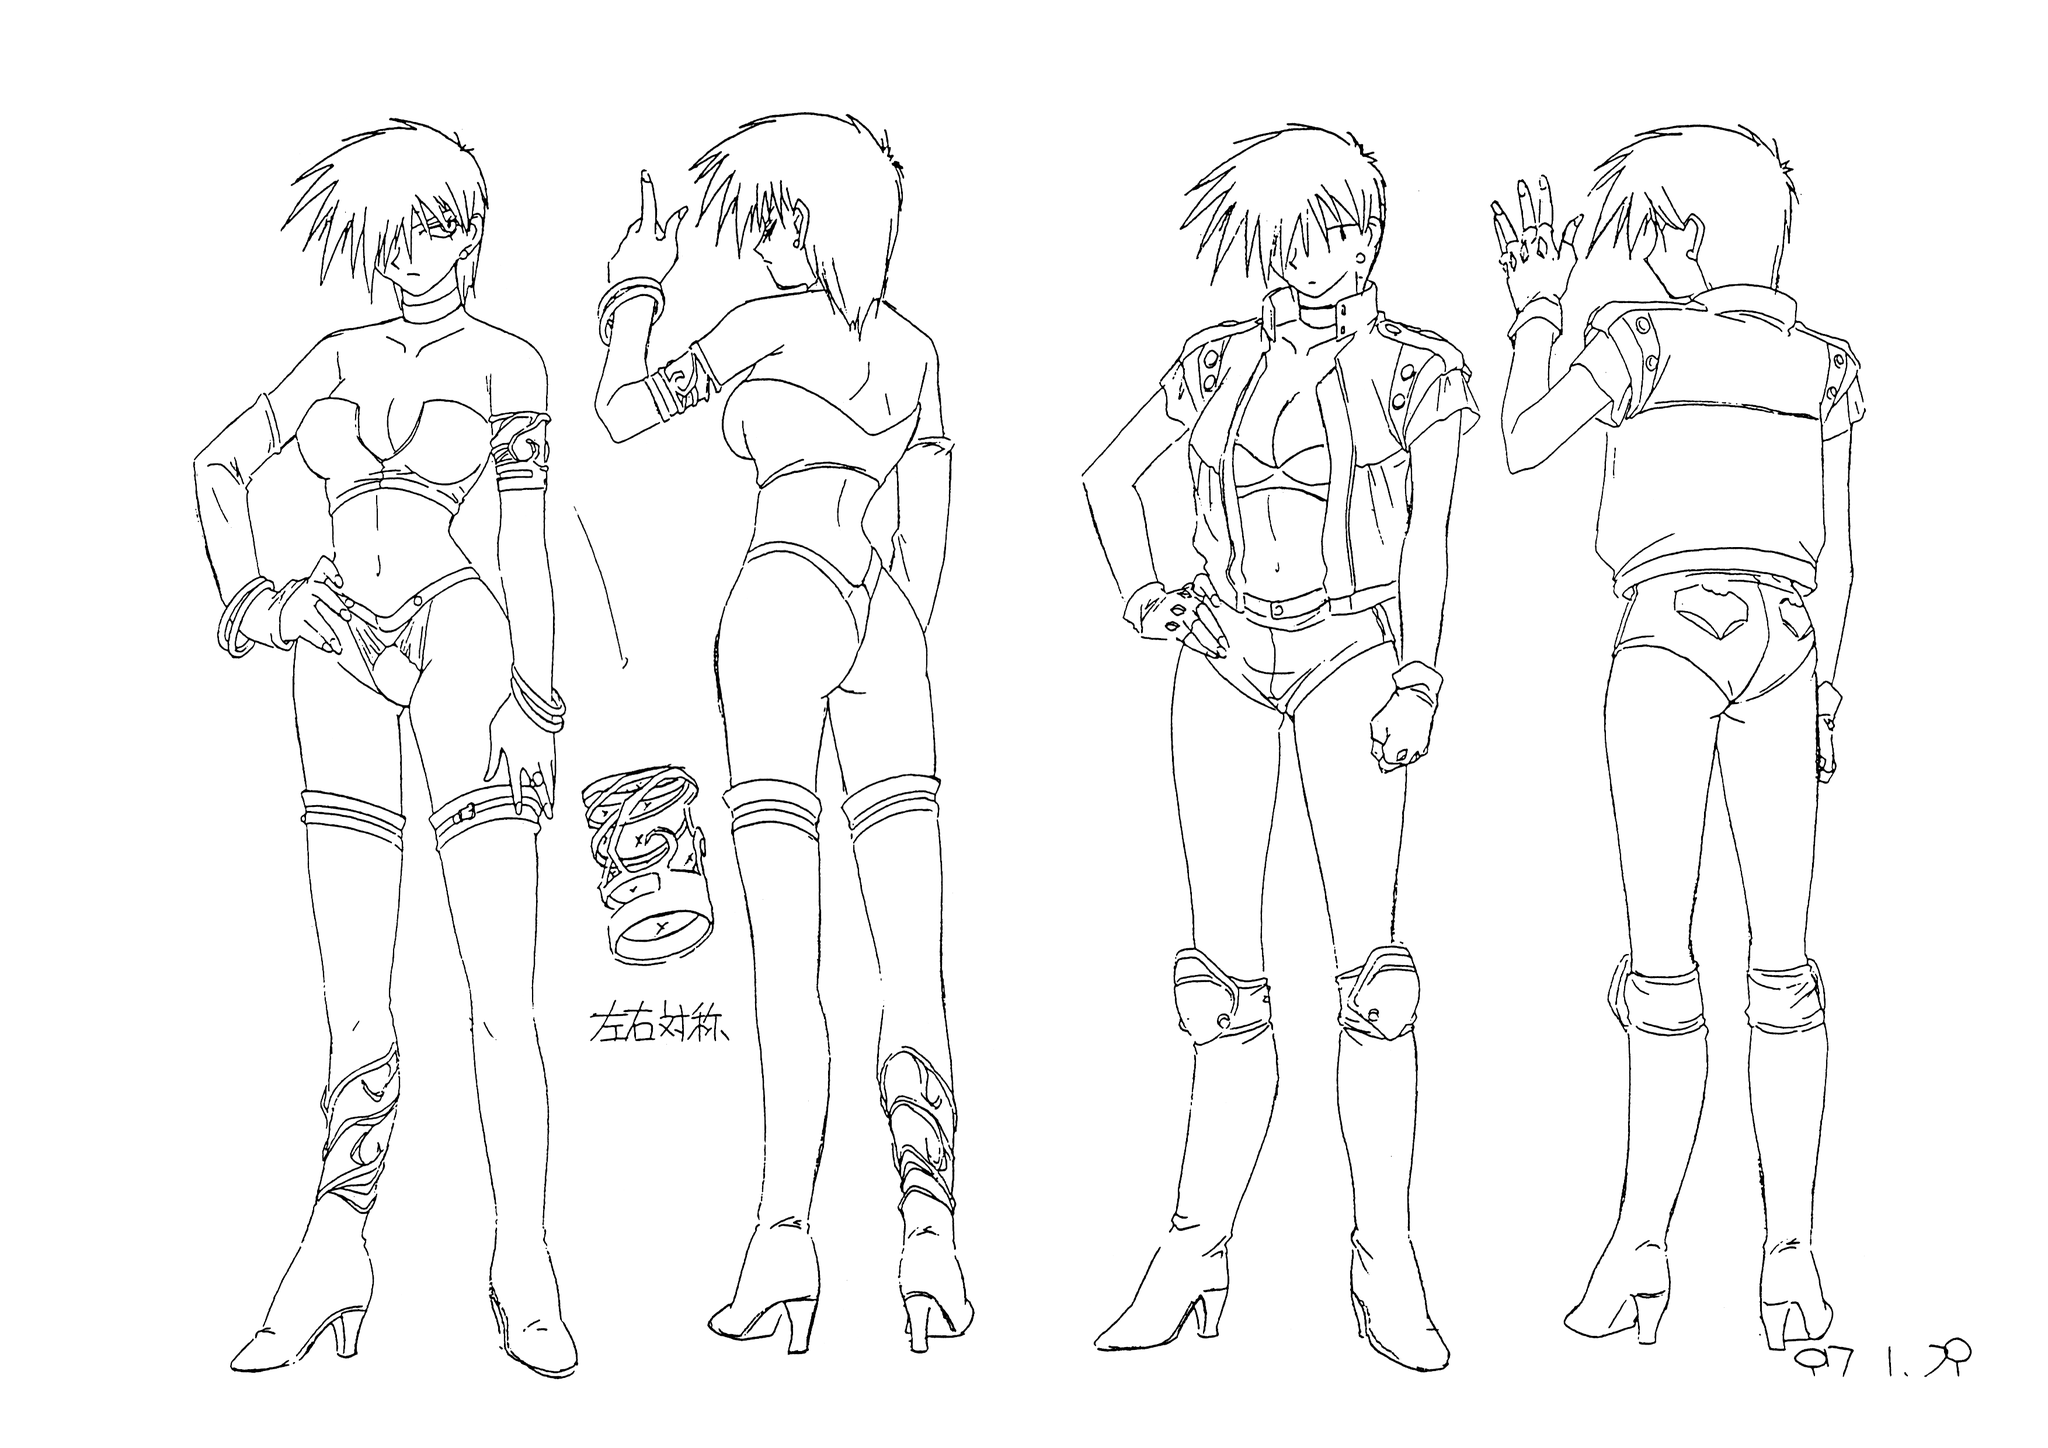 Settei Dreams on X: Futoku no Guild (34 sheets) is now available in the  WIP ( section. #FutokuNoGuild #ImmoralGuild #anime  #animation #settei #modelsheets #conceptart #characterdesign  #charactersheet #ecchi